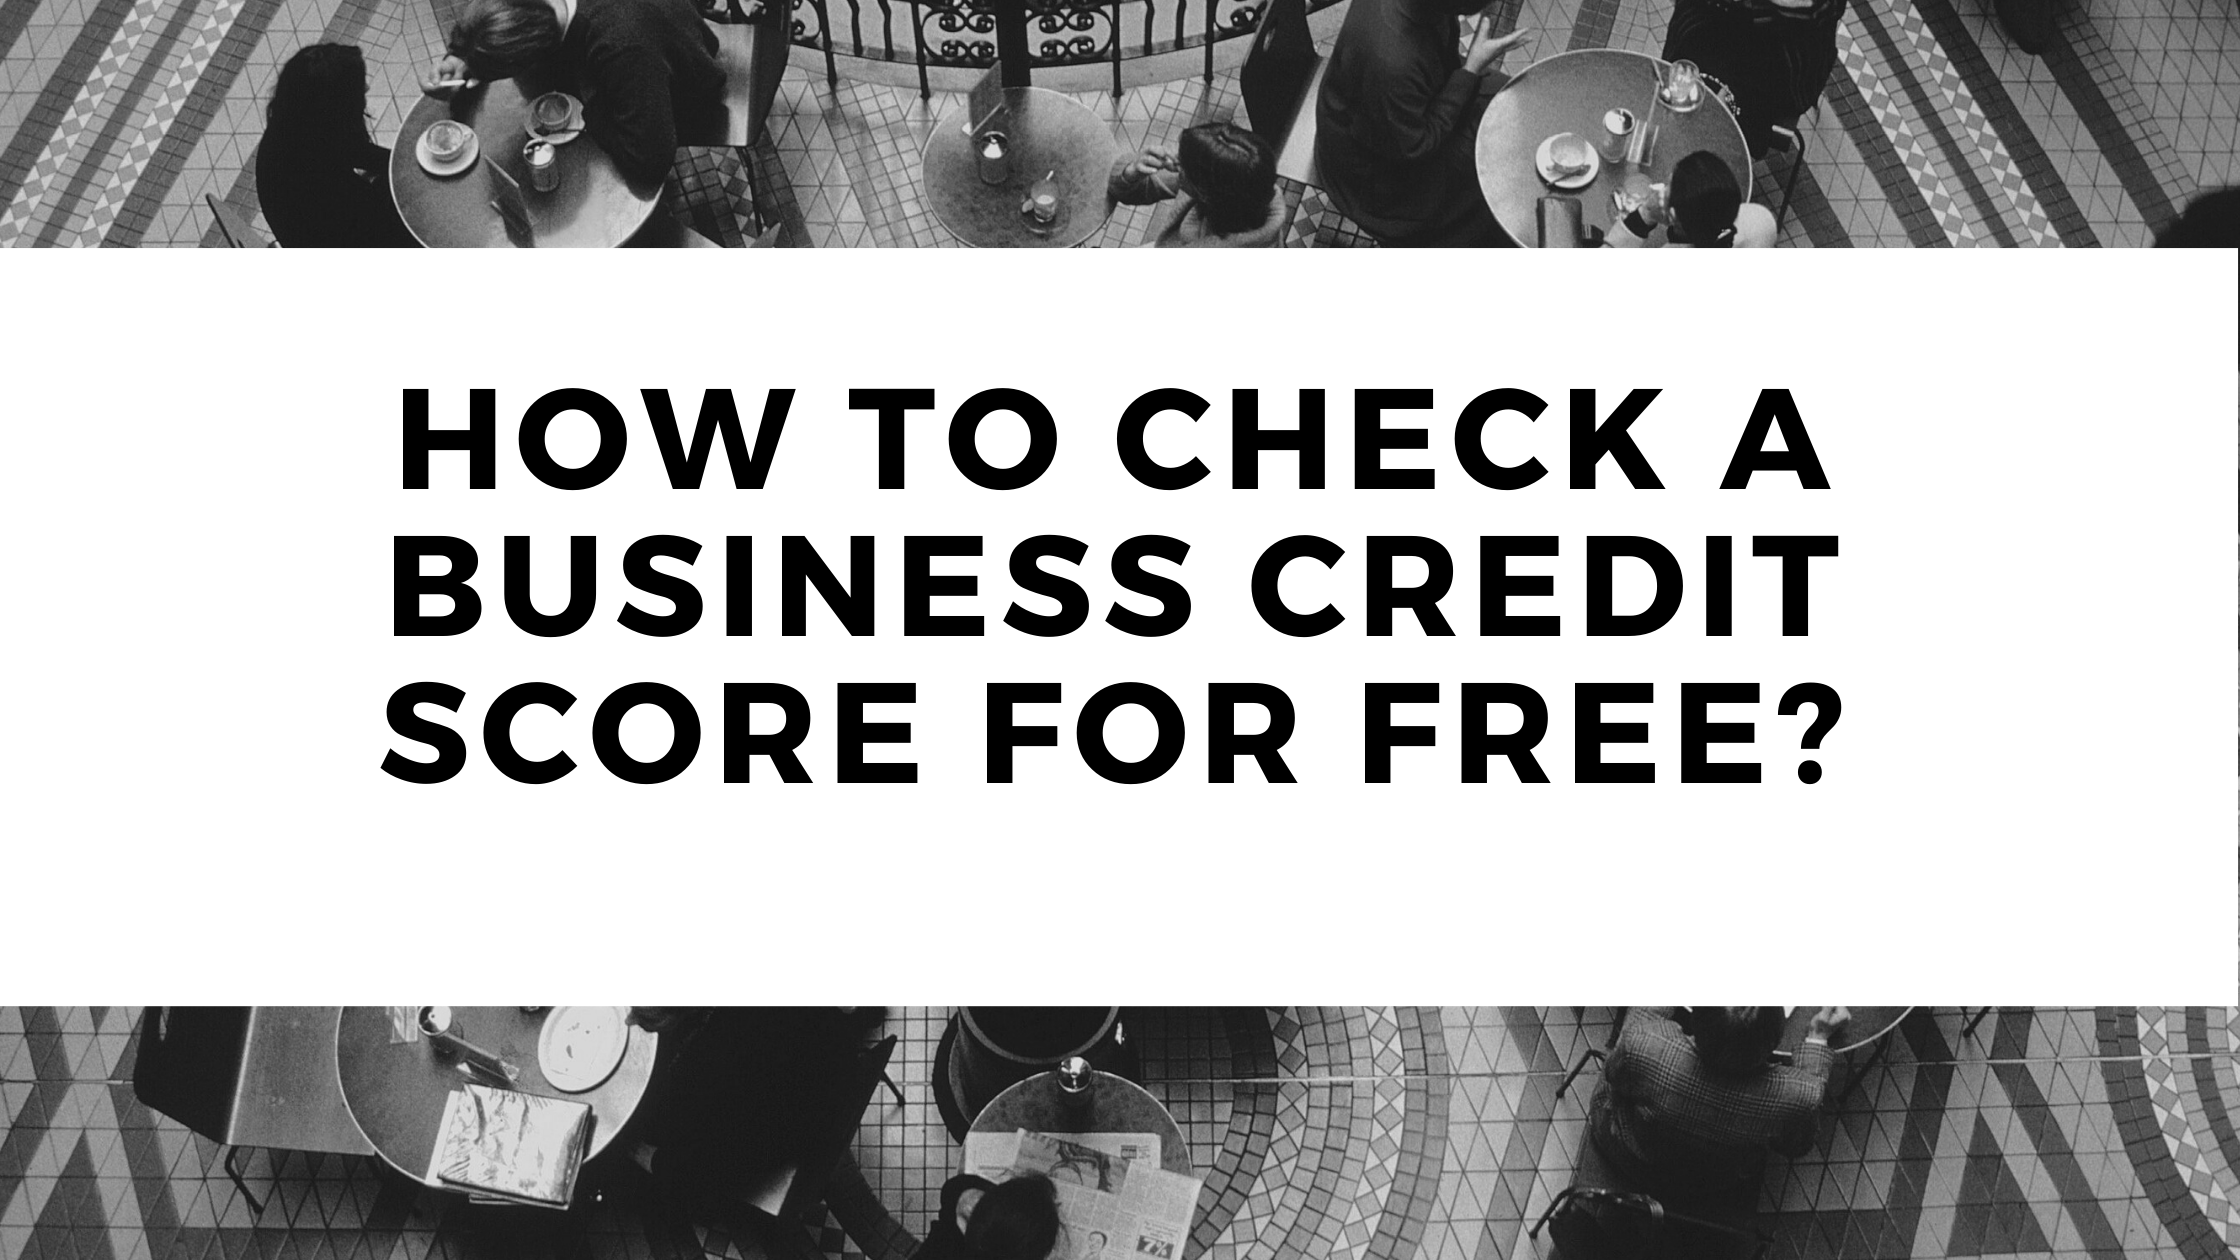 How to check business credit